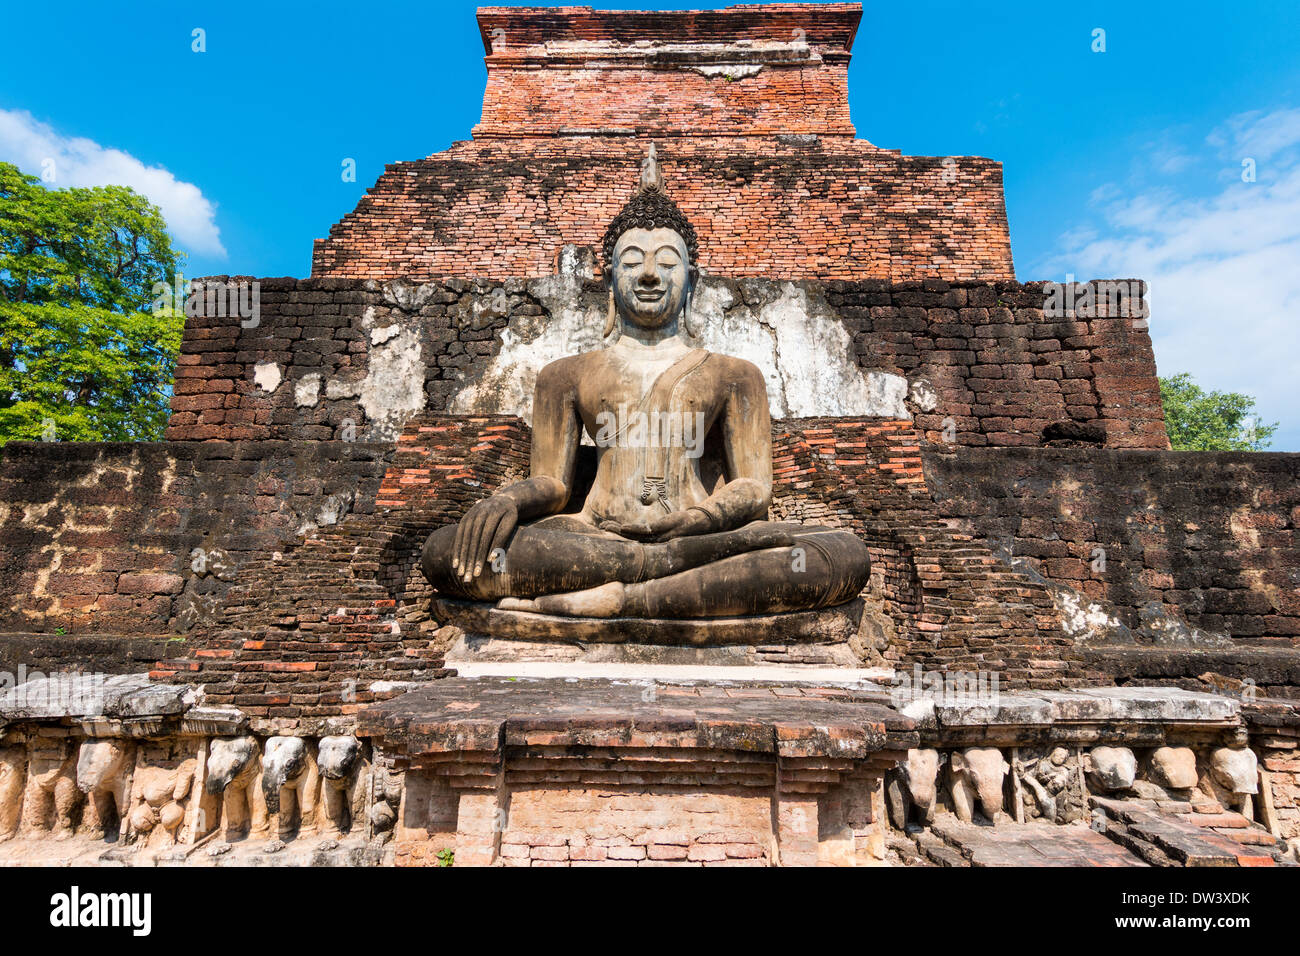 Sitting Budha in Wat Mahathat, historical park which covers the ruins of the old city of Sukhothai, Thailanda Stock Photo